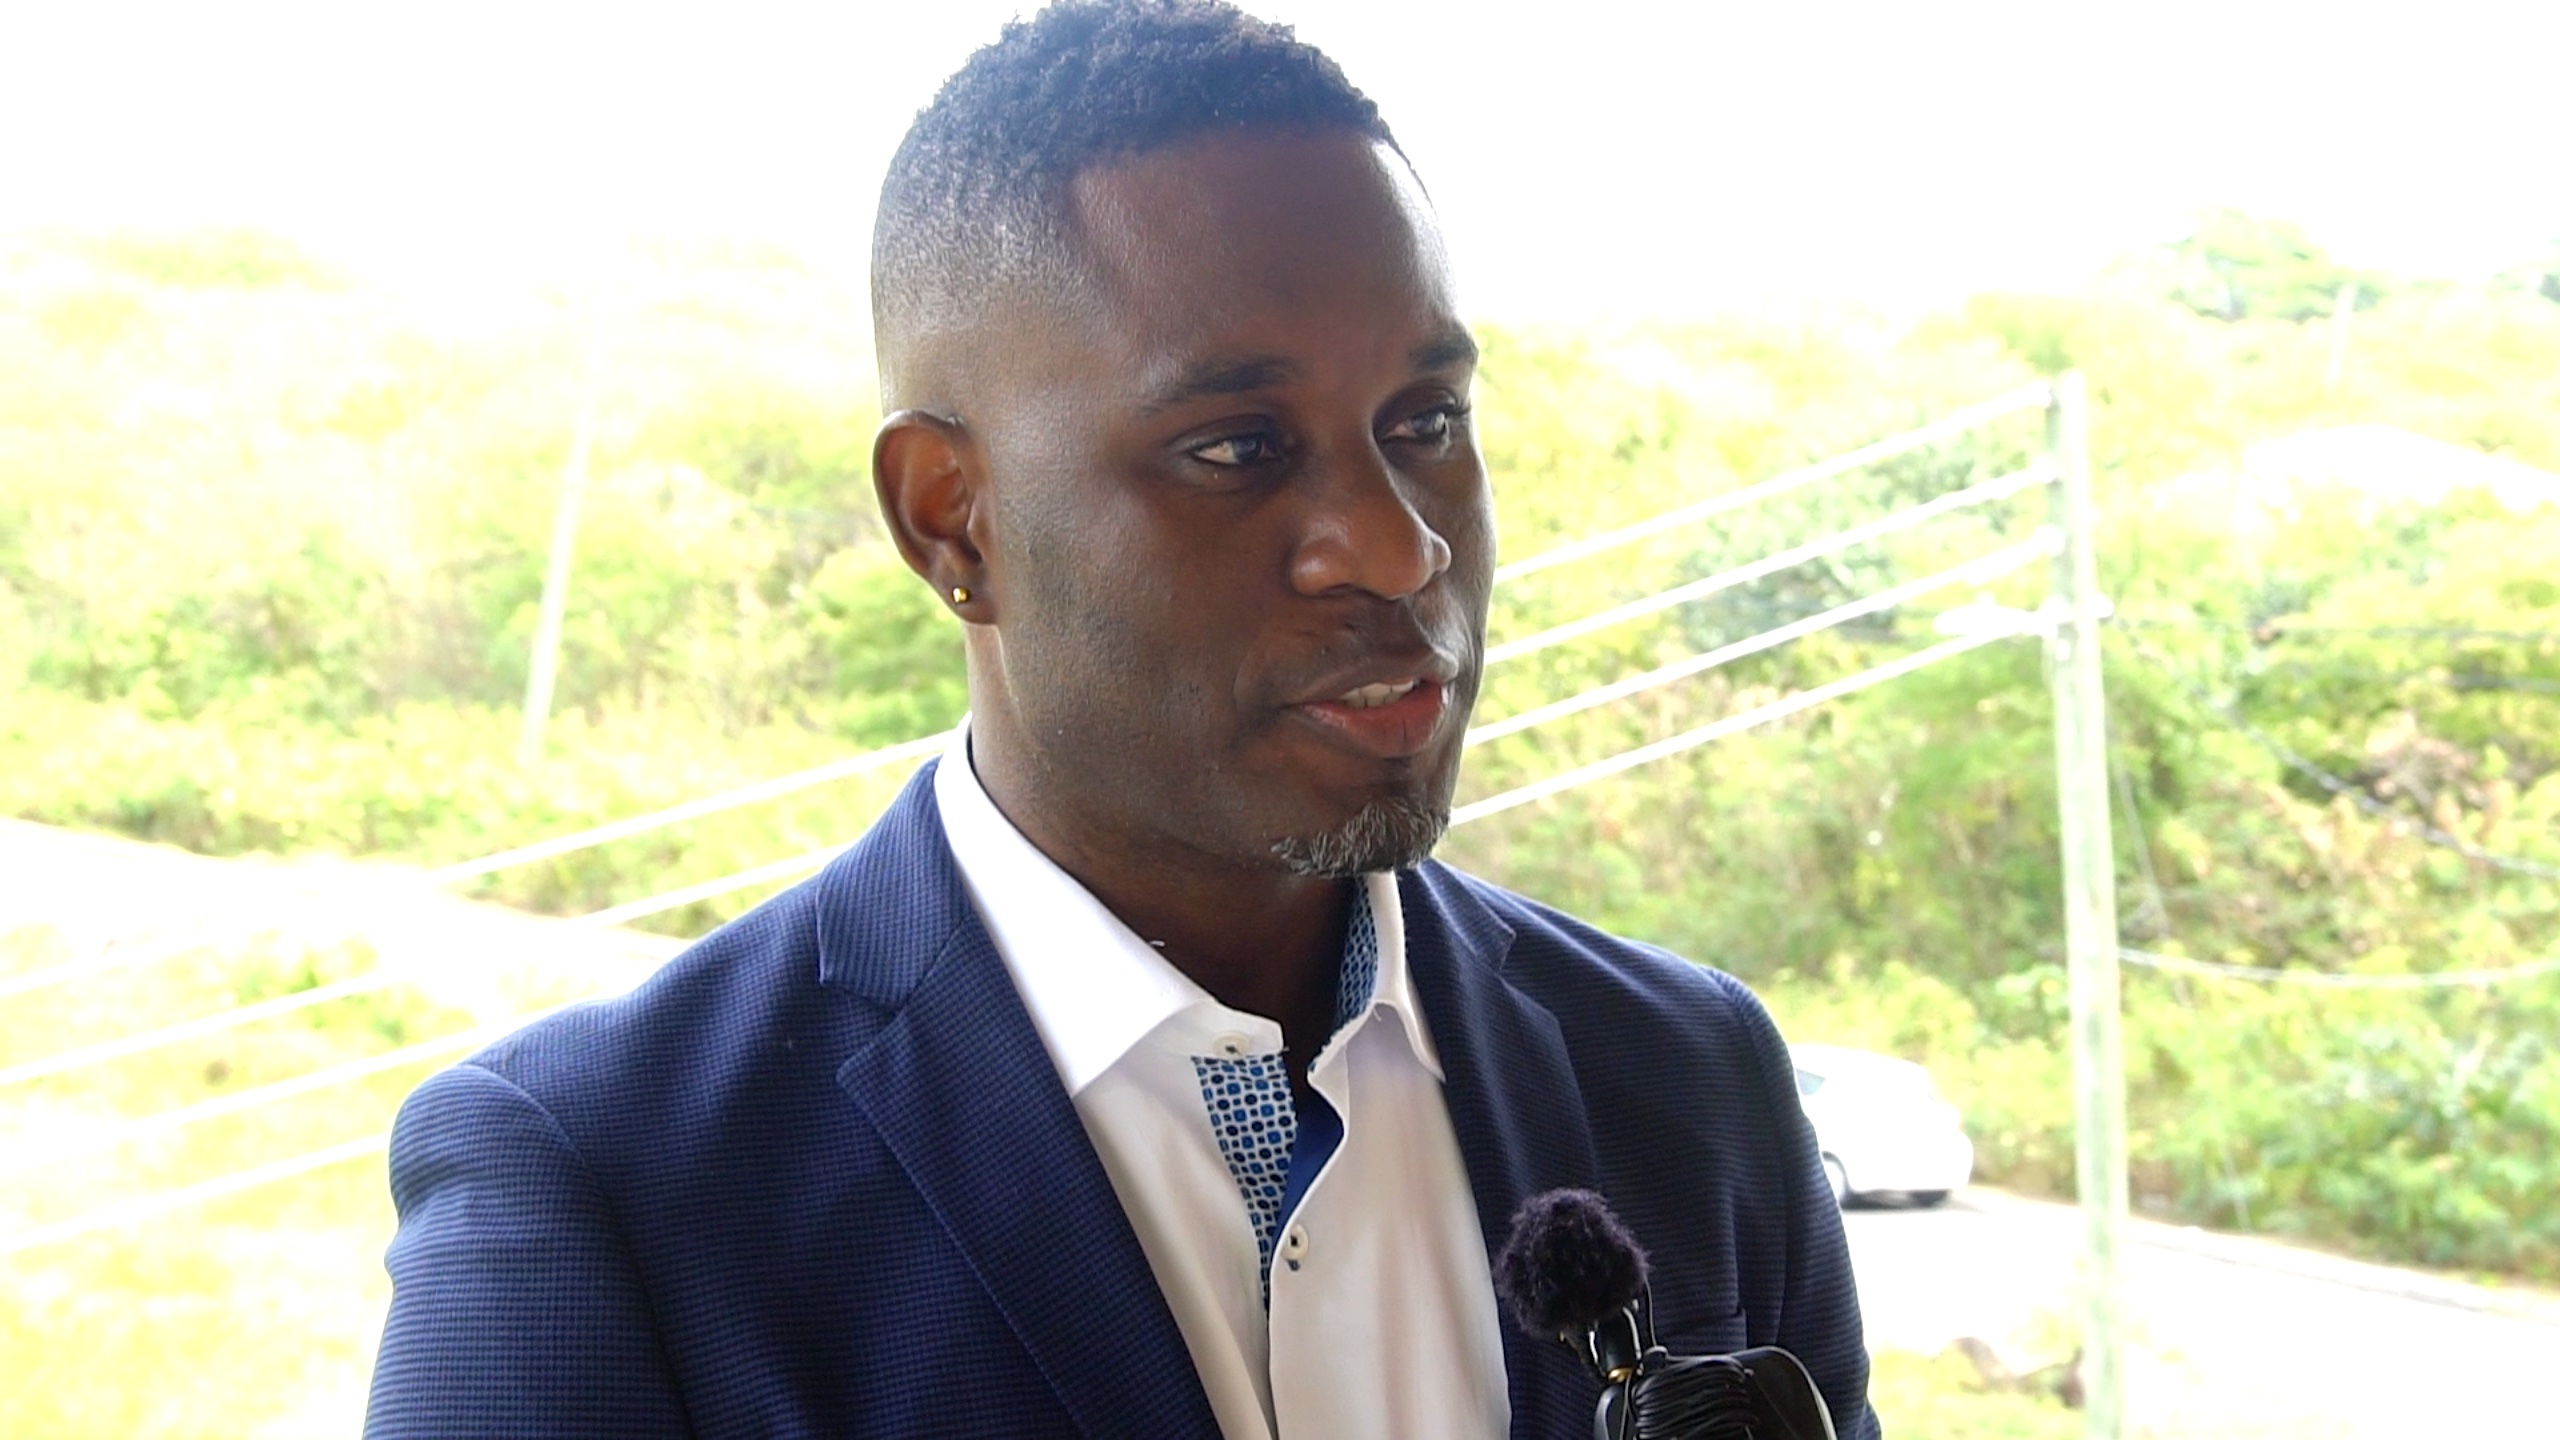 Mr. Anthony Reid, Director of Economy, Nature and Infrastructure in St. Eustatius visiting Nevis on March 30, 2023